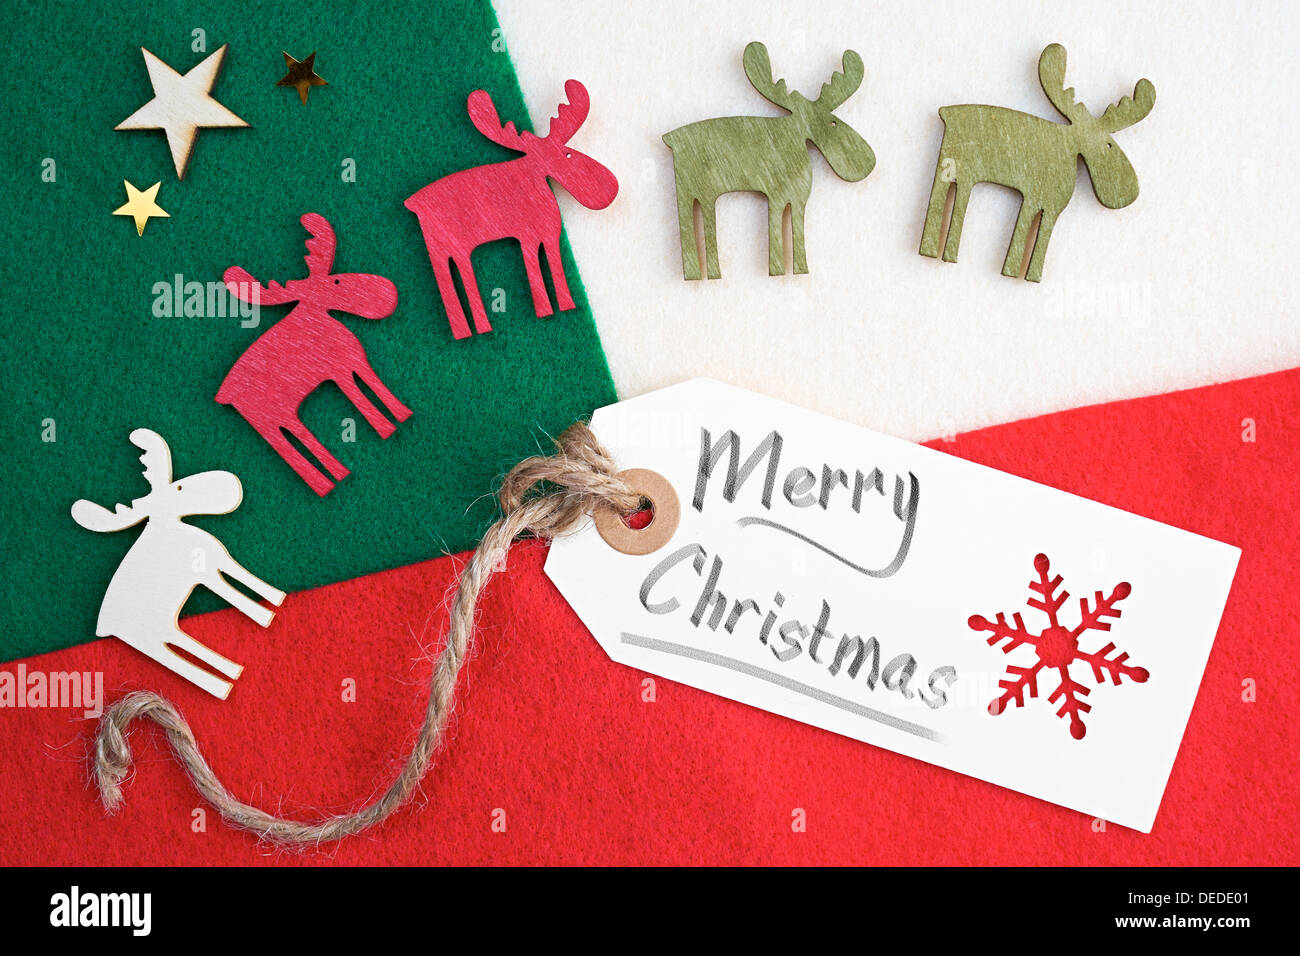 Christmas gift tag on a red, Green and cream felt material background. Stock Photo